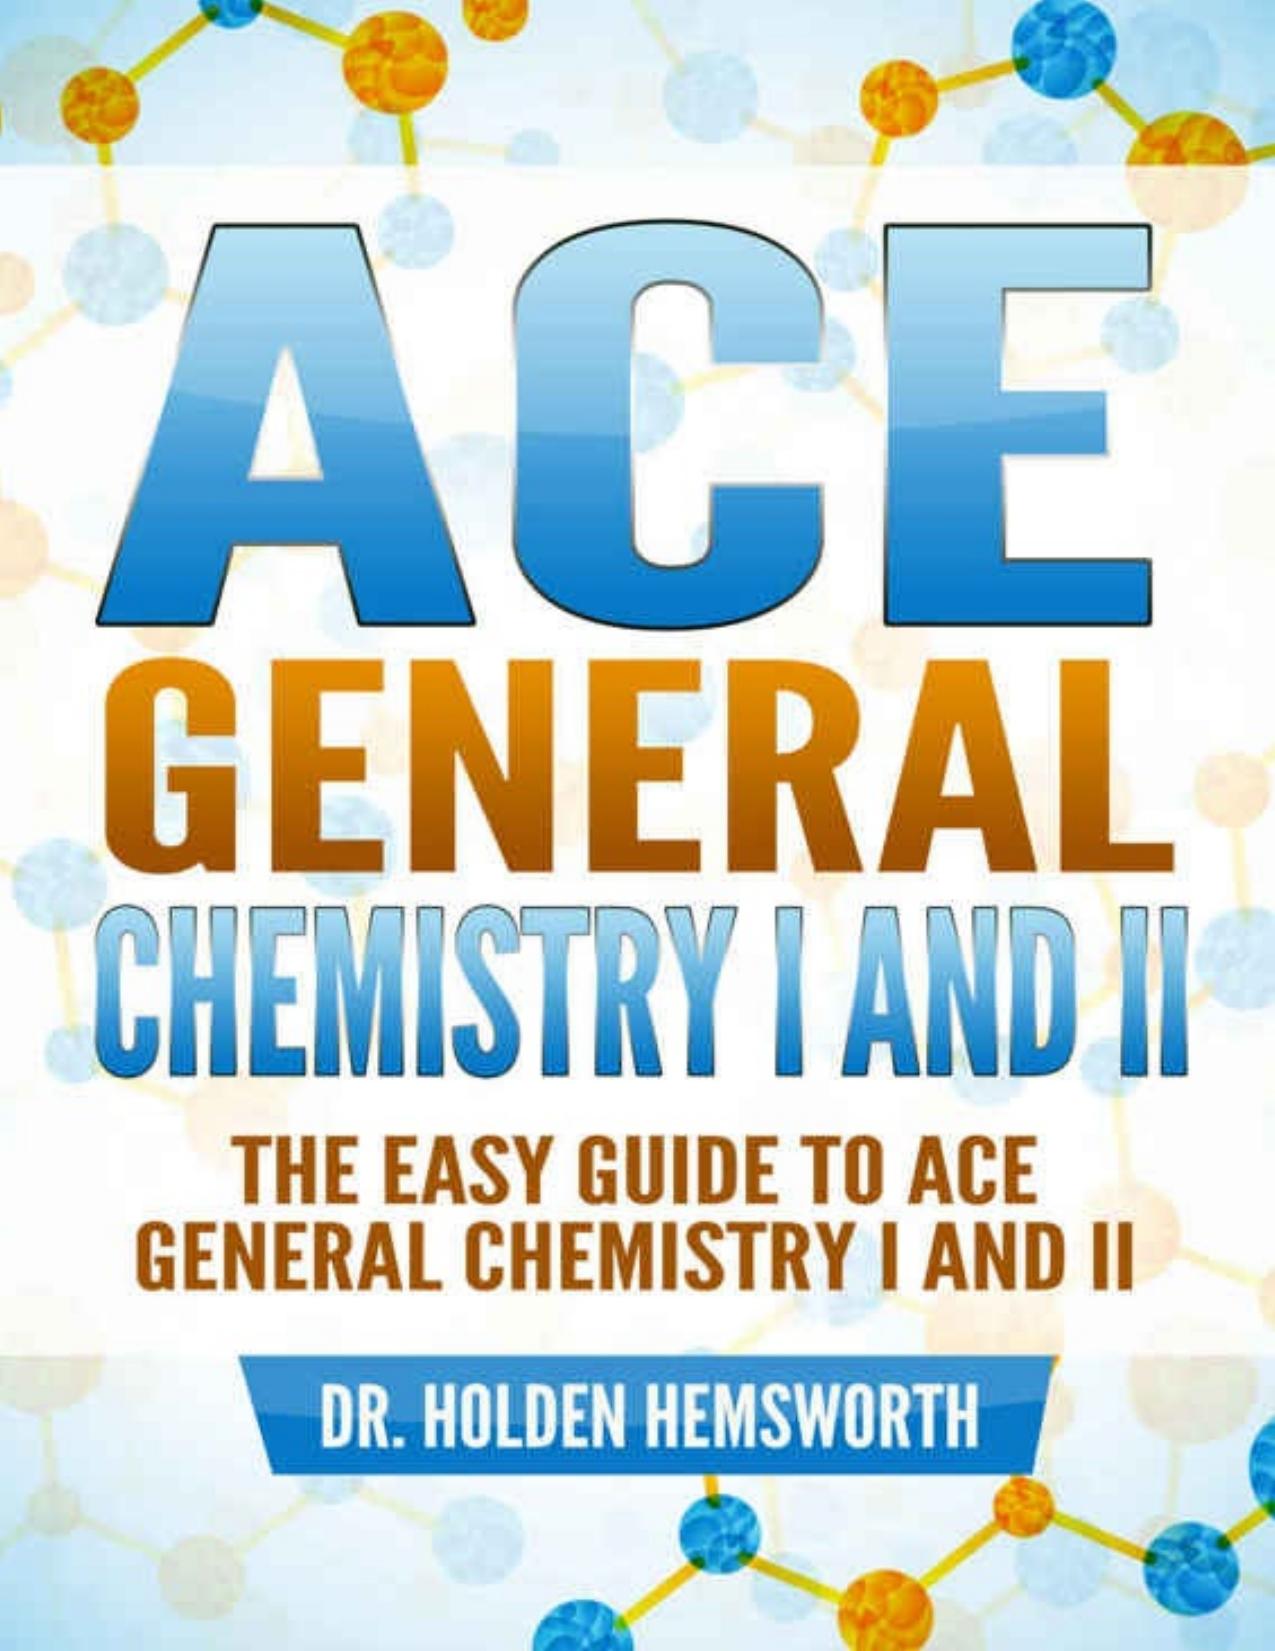 The EASY Guide to Ace General Chemistry I and II: General Chemistry Study Guide, General Chemistry Review - PDFDrive.com